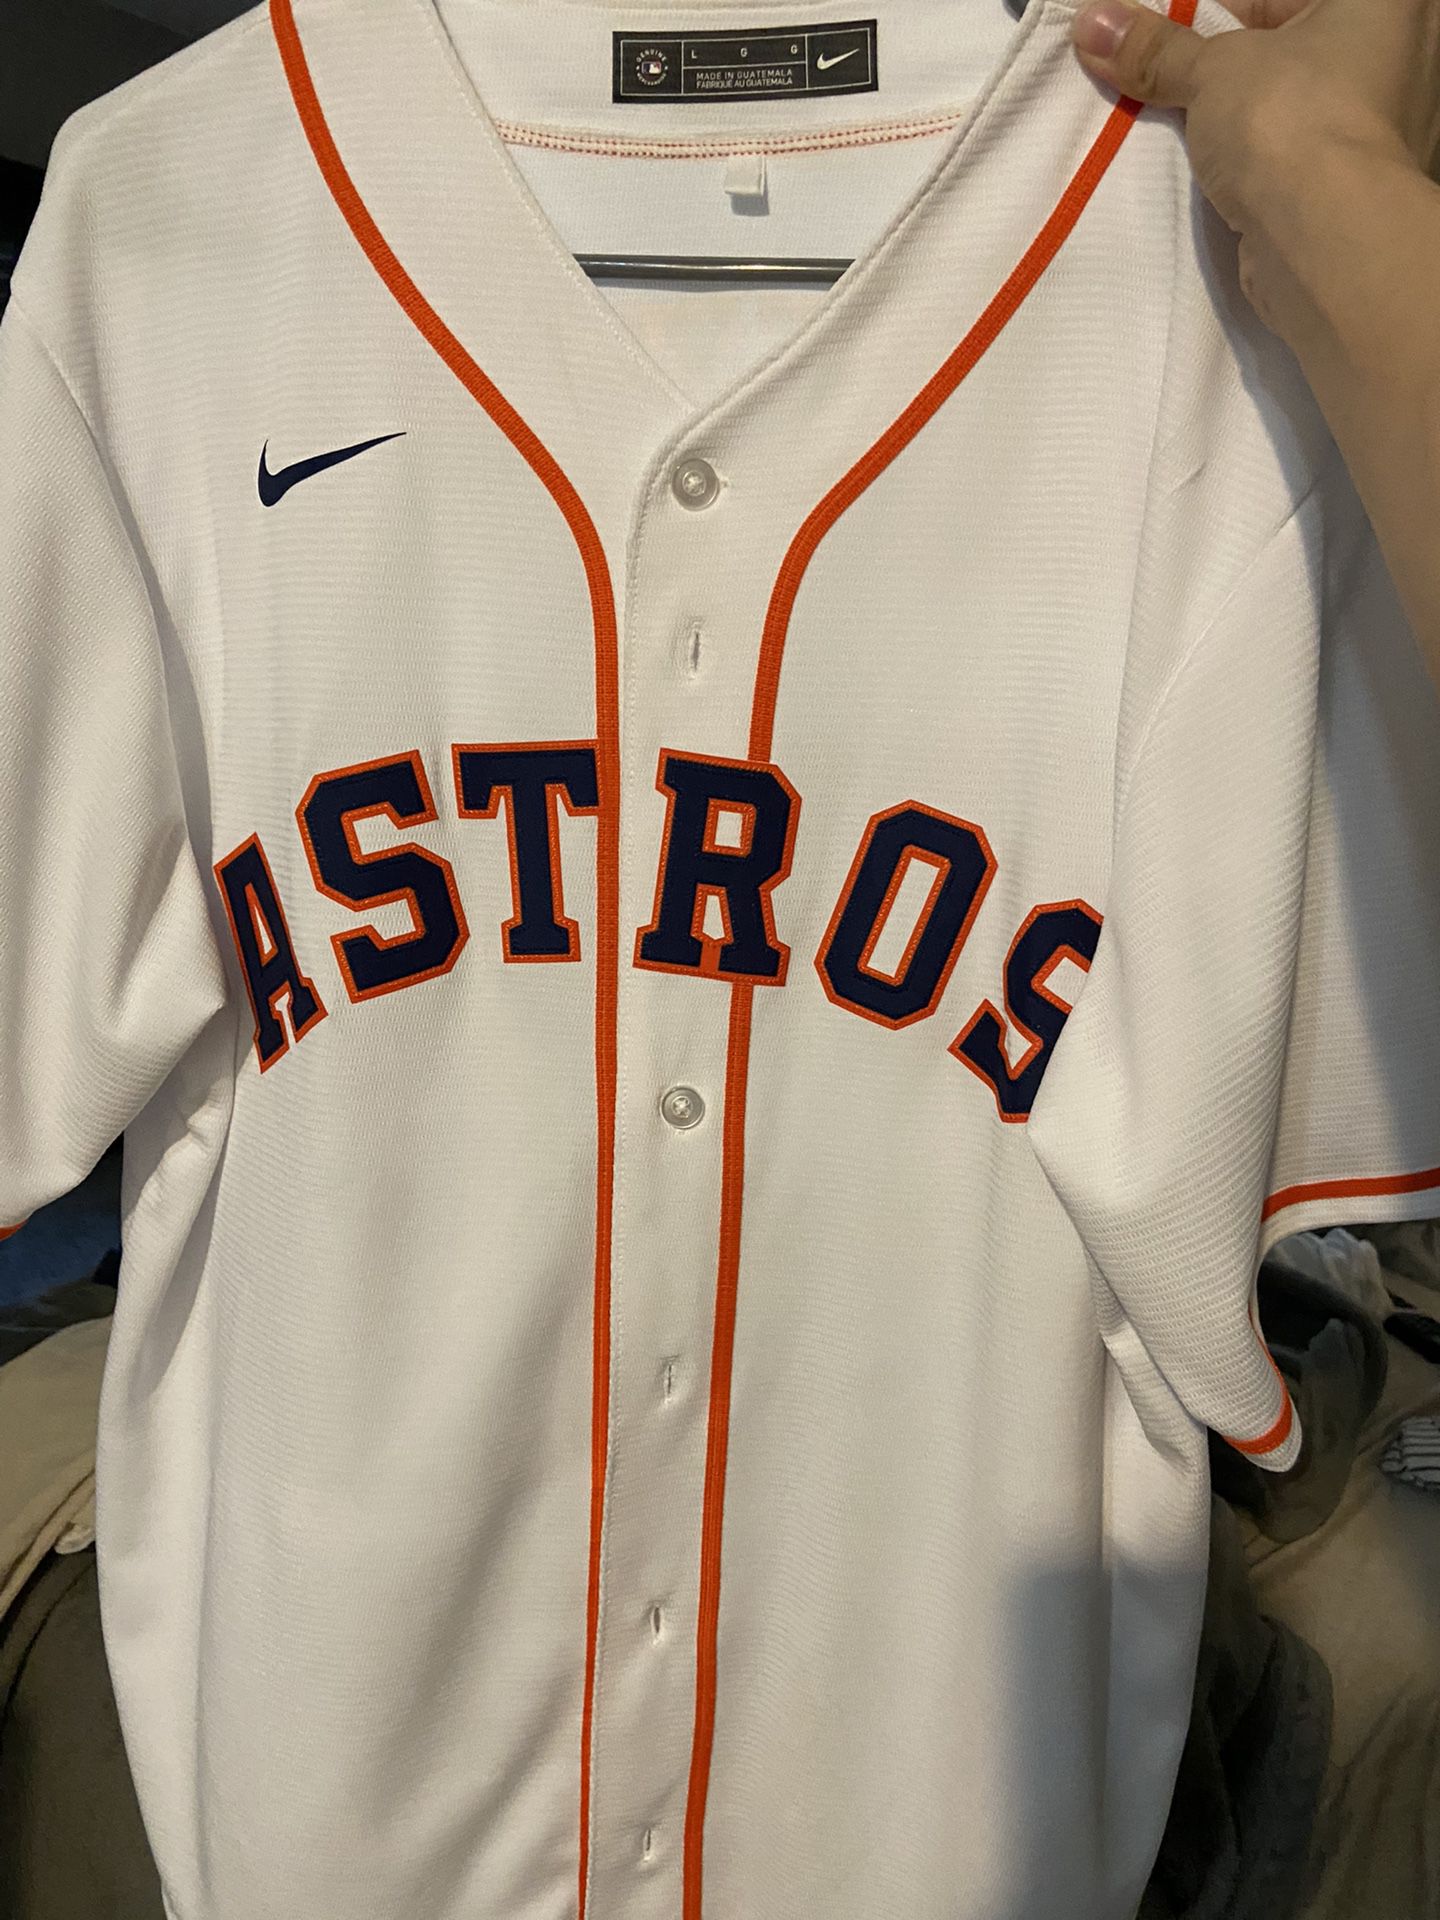 ASTROS CHAMPIONS EDITION JERSEY for Sale in Pharr, TX - OfferUp